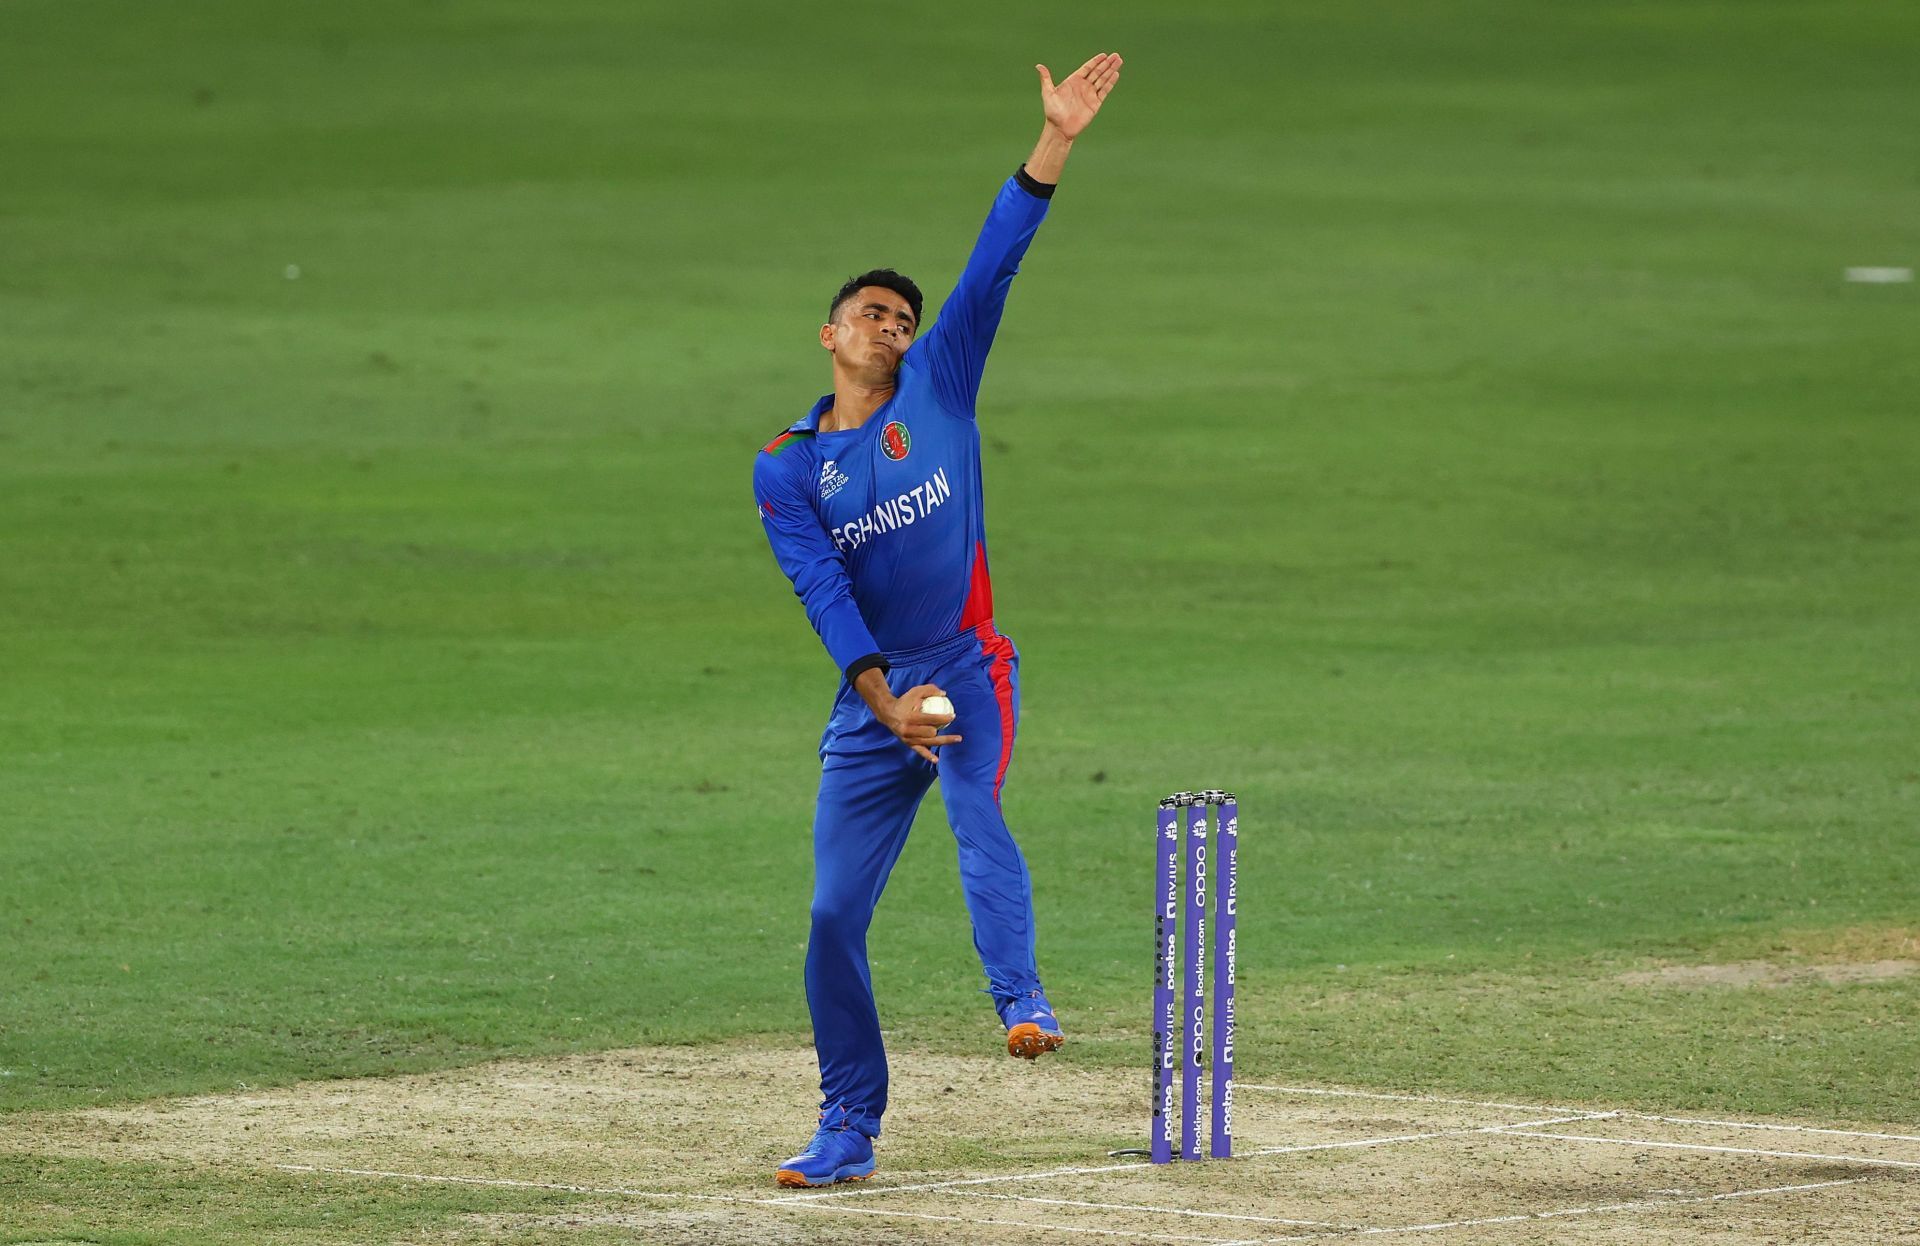 Mujeeb Ur Rahman bowling during the T20 World Cup. Pic: Getty Images